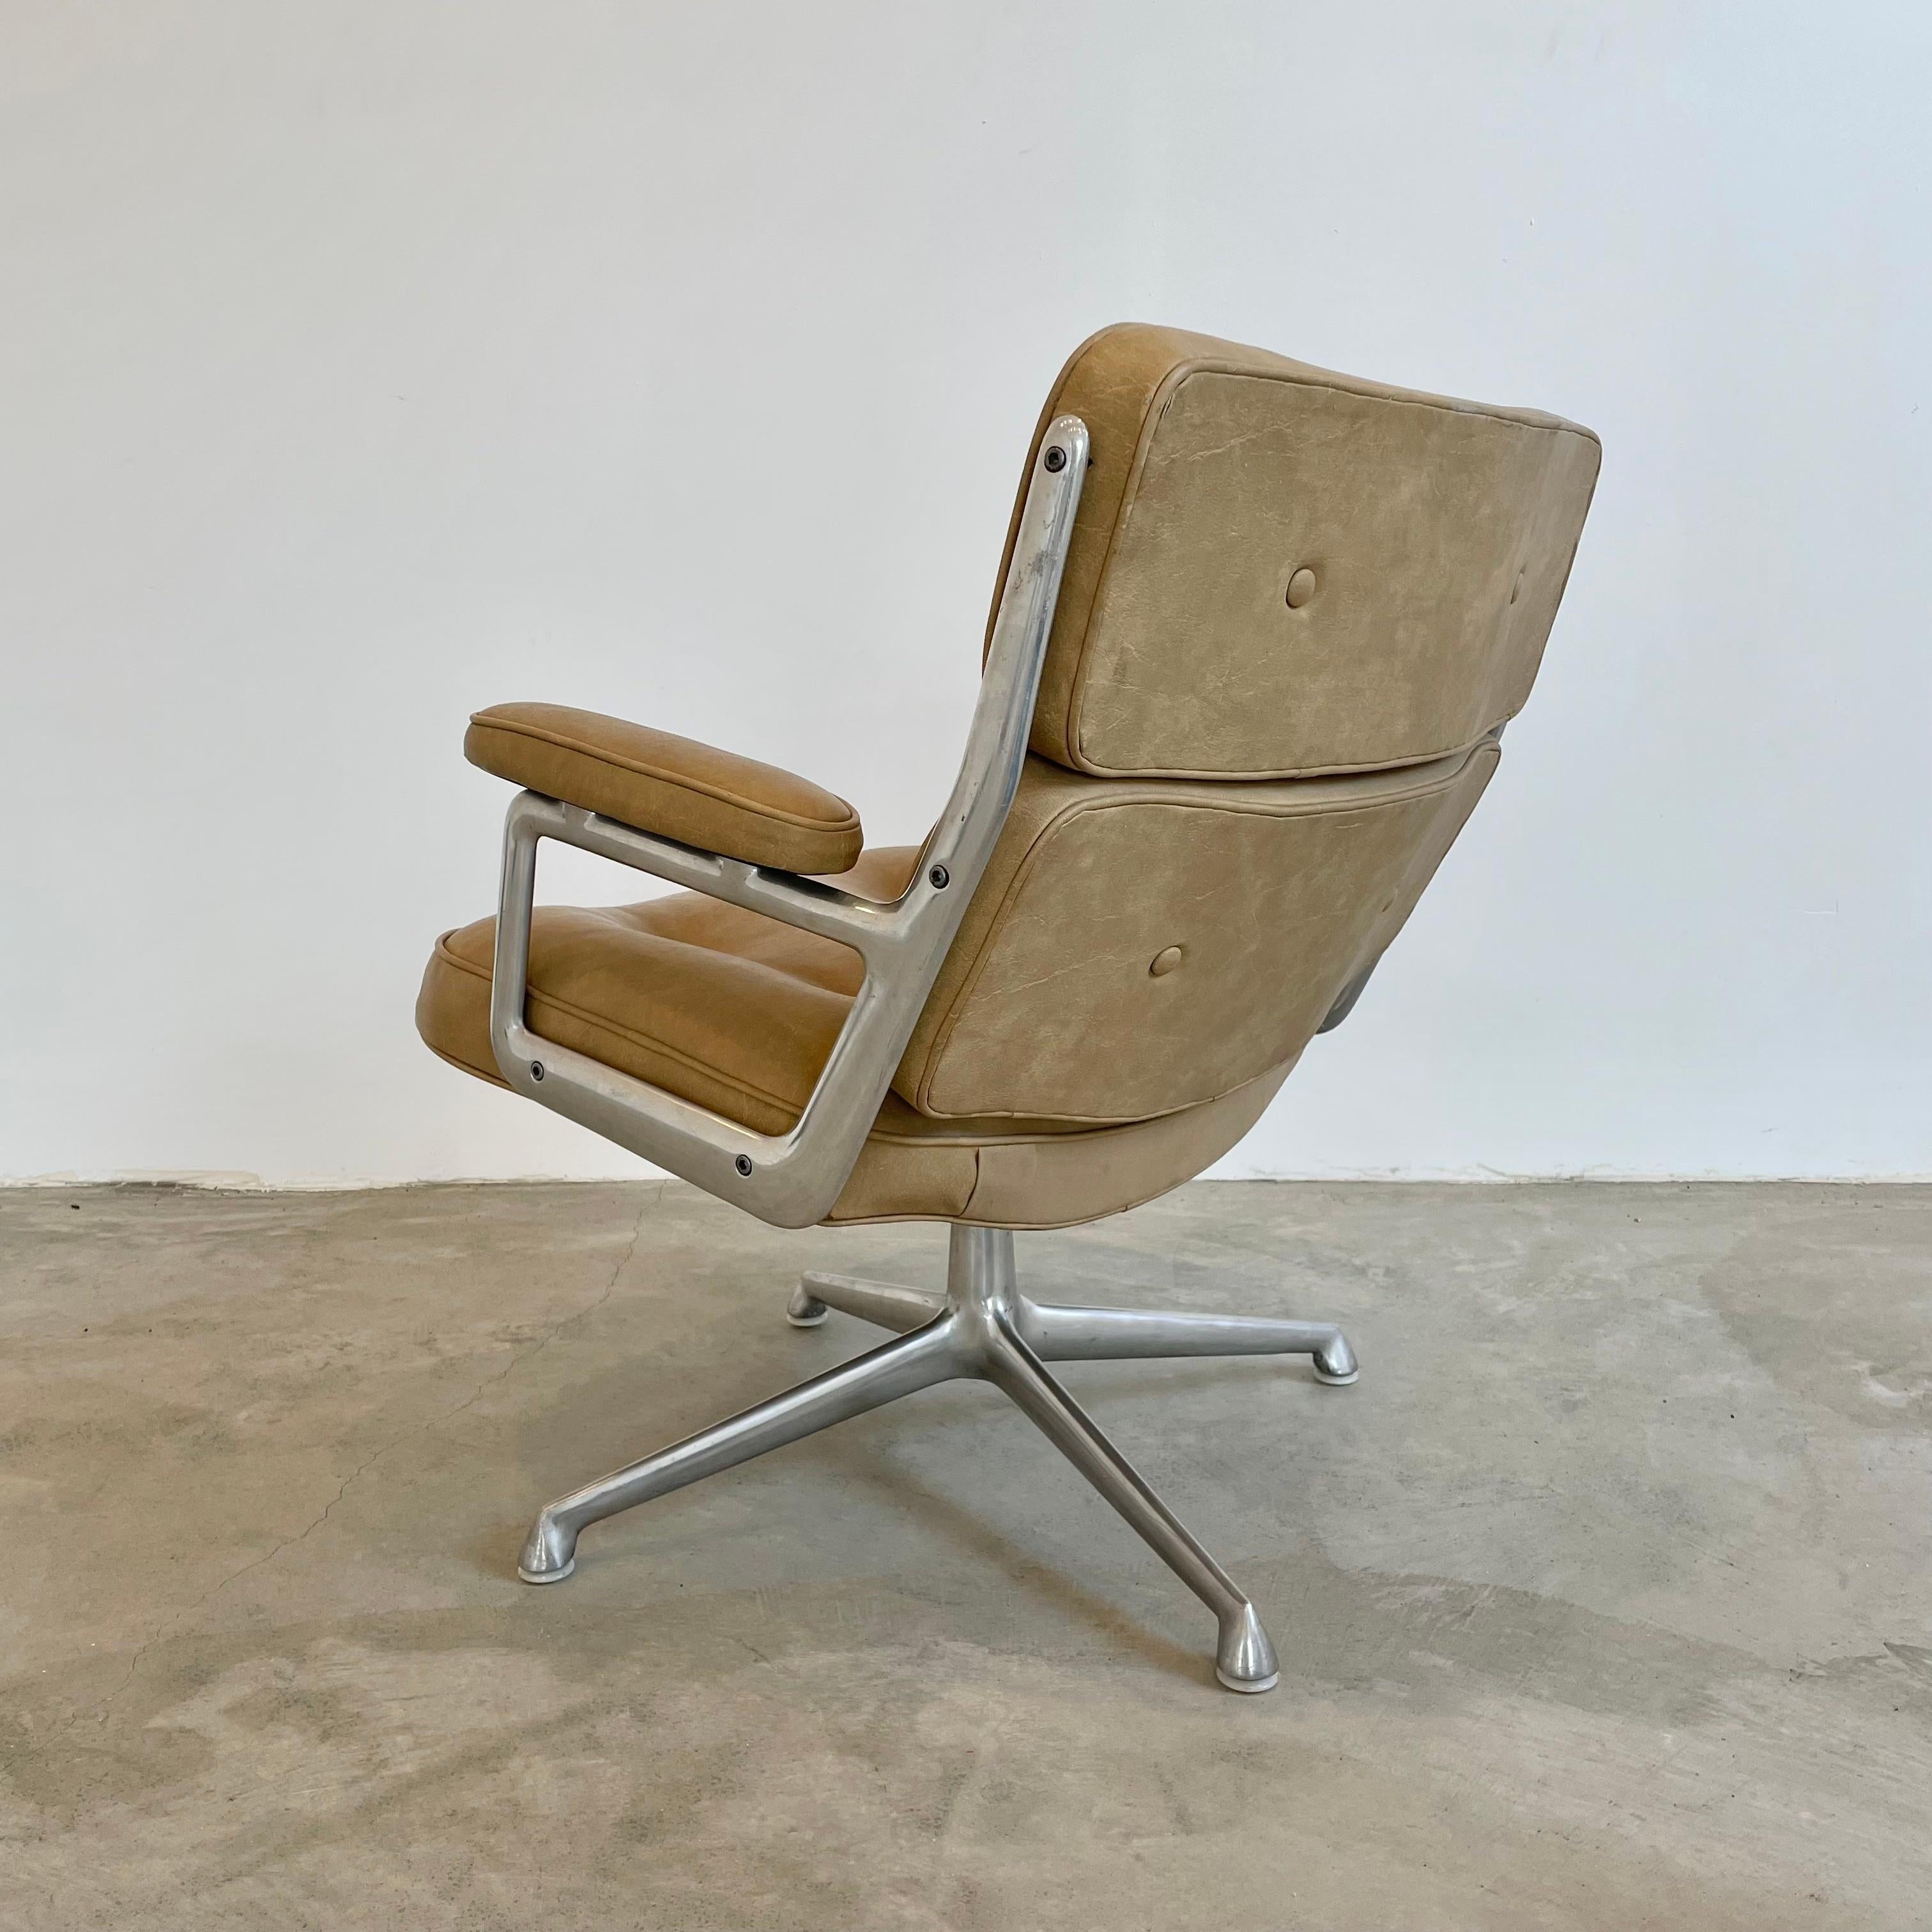 Vintage Eames Time Life Lobby Chair in Camel 2